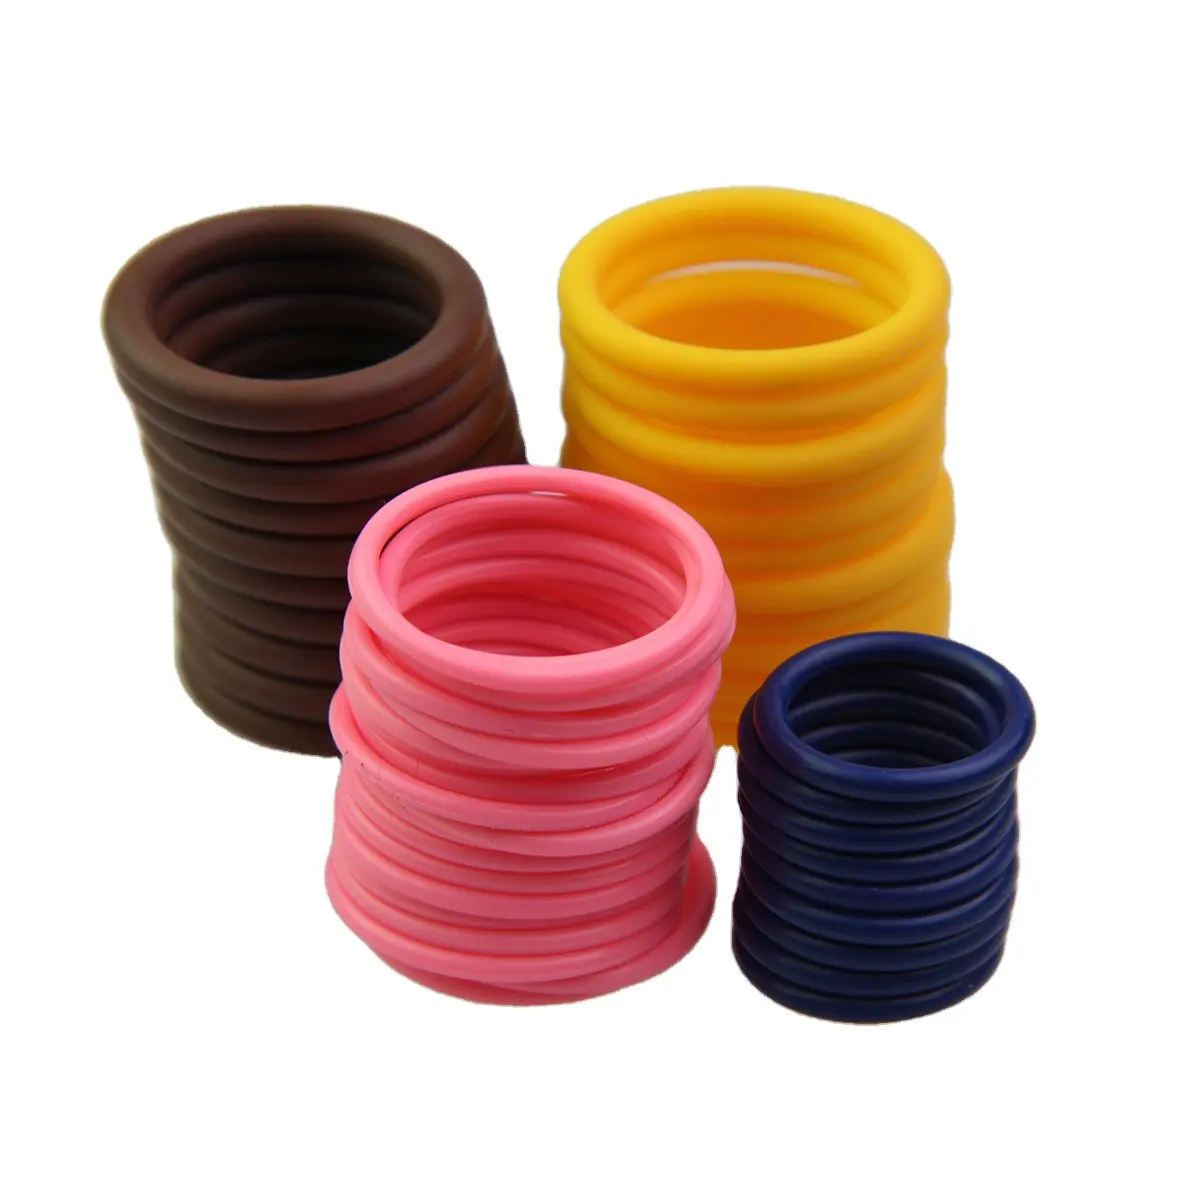 High Quality oil and gas resistant o-rings o ring seal rubber products